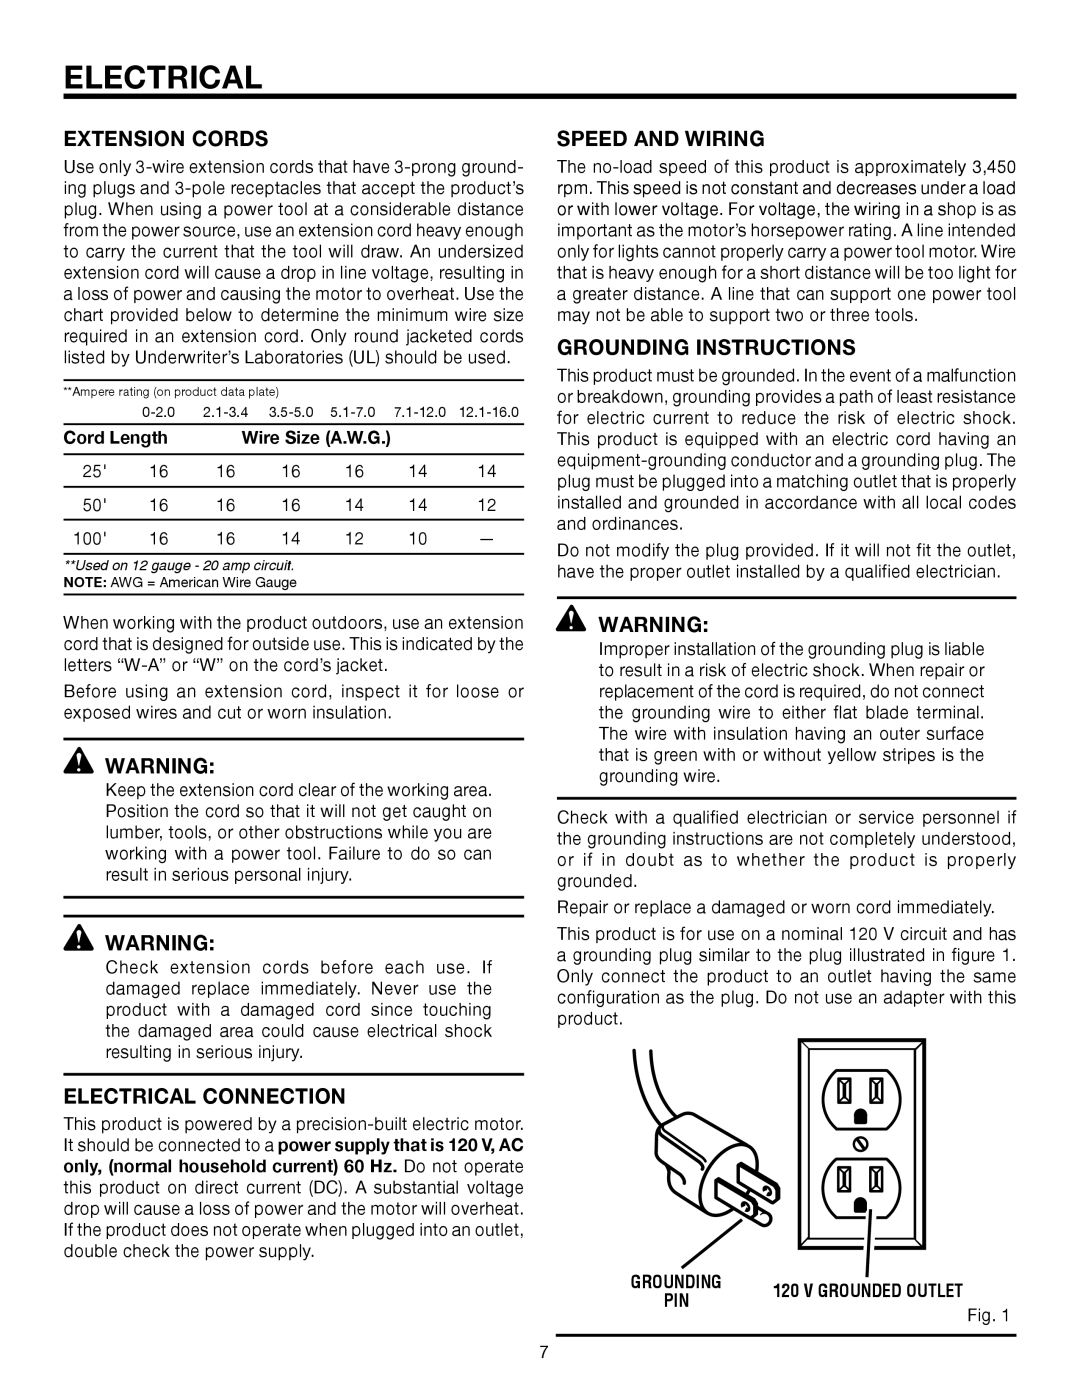 RIDGID OL50145MW manual Extension Cords, Electrical Connection, Speed and Wiring, Grounding Instructions 